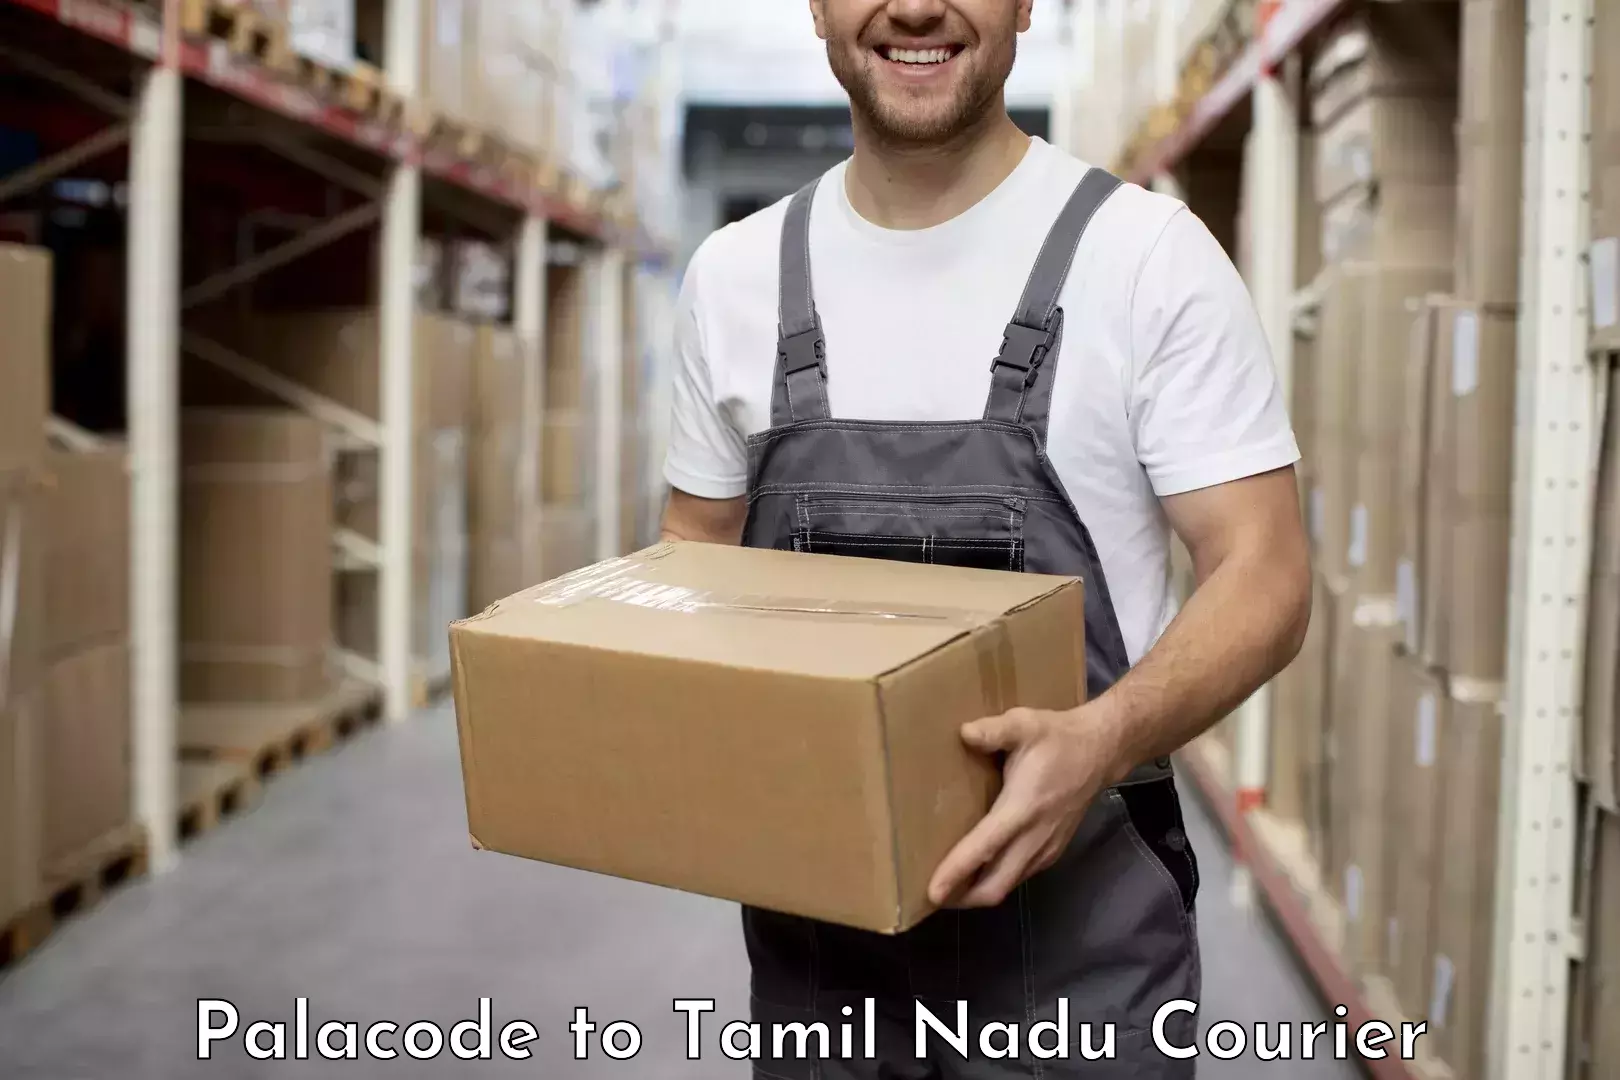 Courier rate comparison Palacode to Tirunelveli